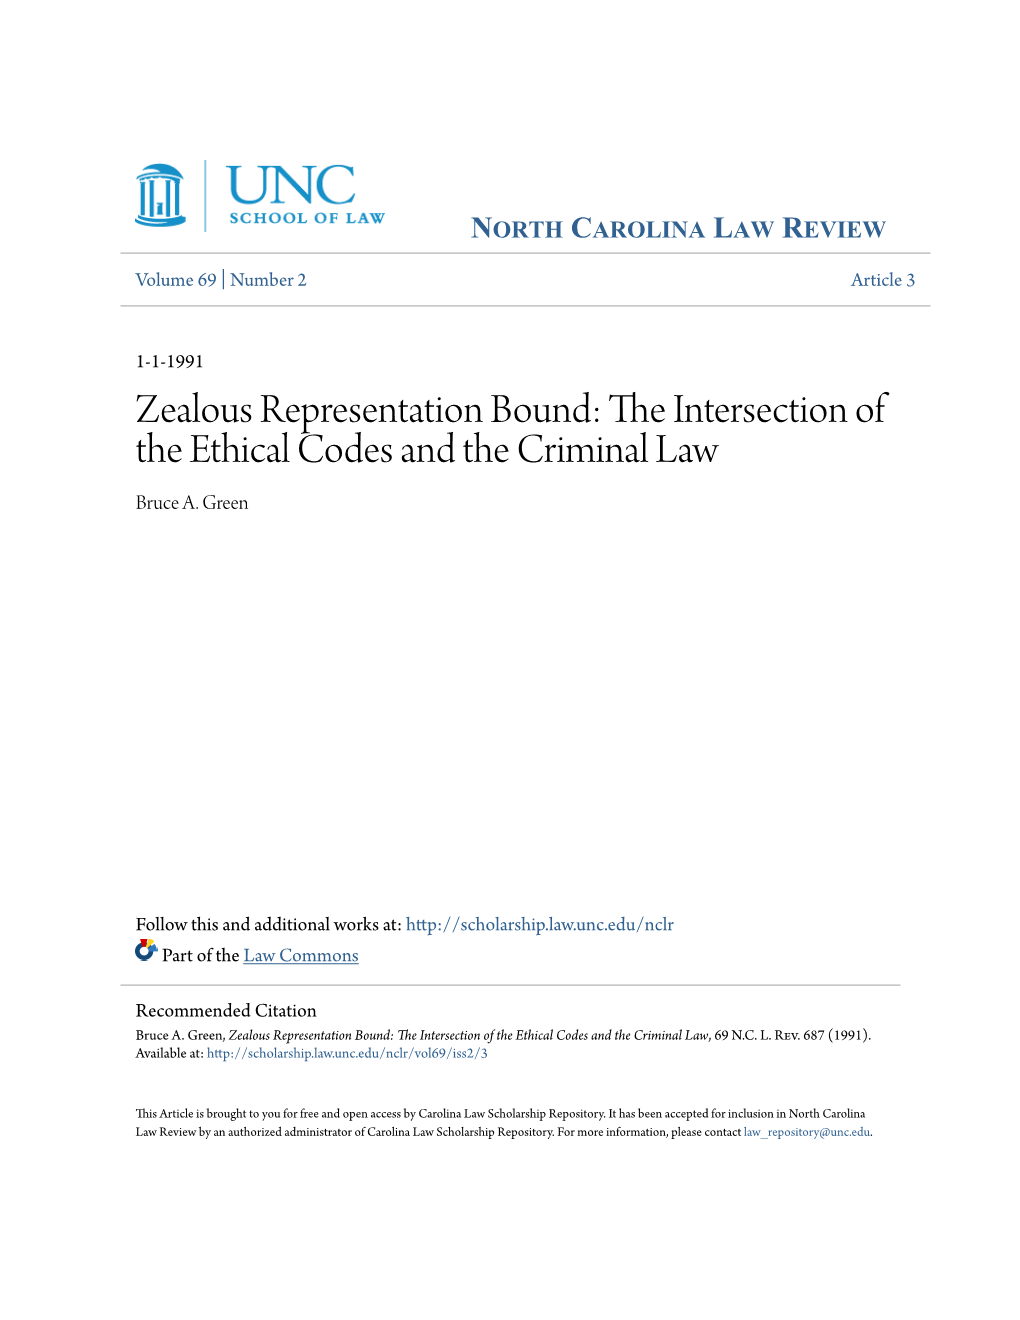 Zealous Representation Bound: the Intersection of the Ethical Codes and the Criminal Law, 69 N.C